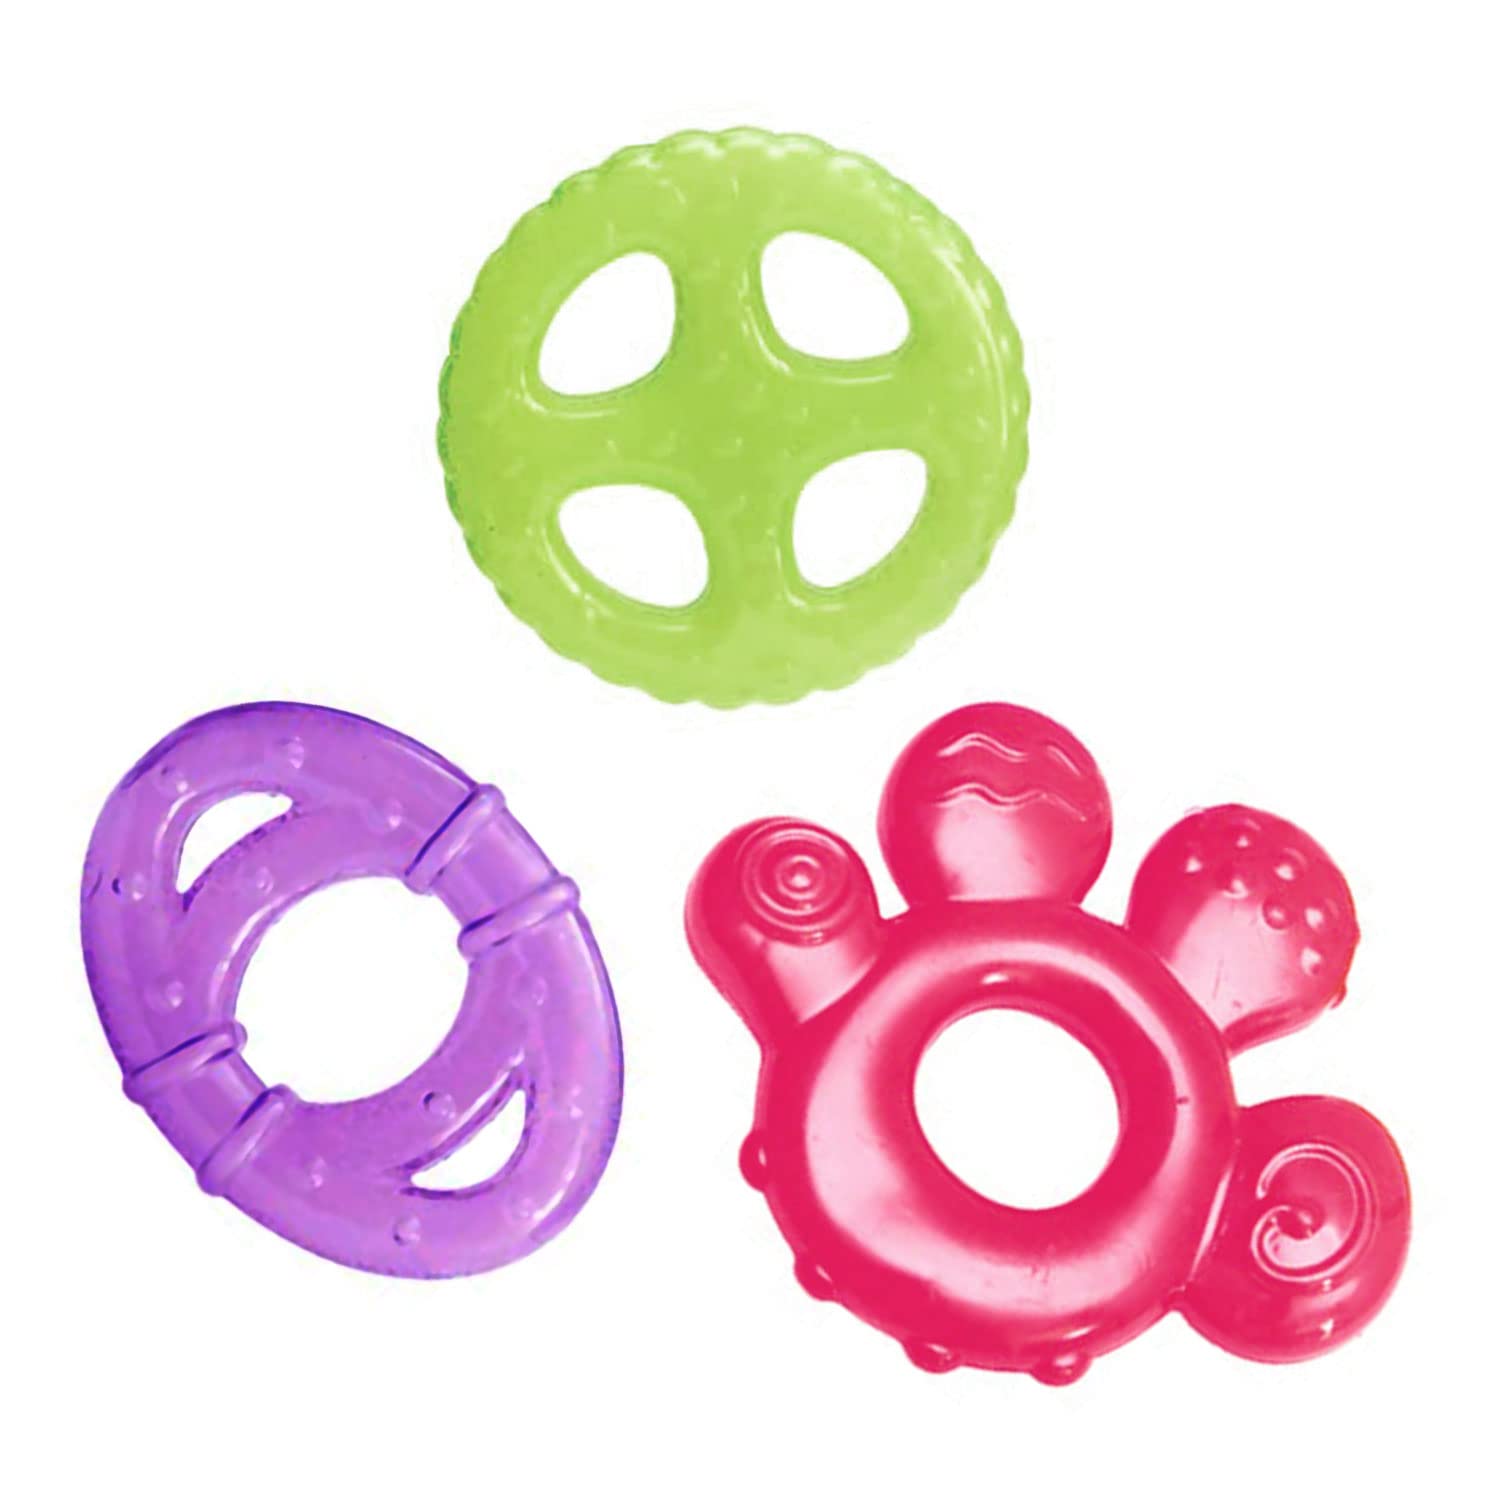 HOPOP BPA Free Water Filled Cooling Teether For Babies - Multicolor 3pcs 4m+